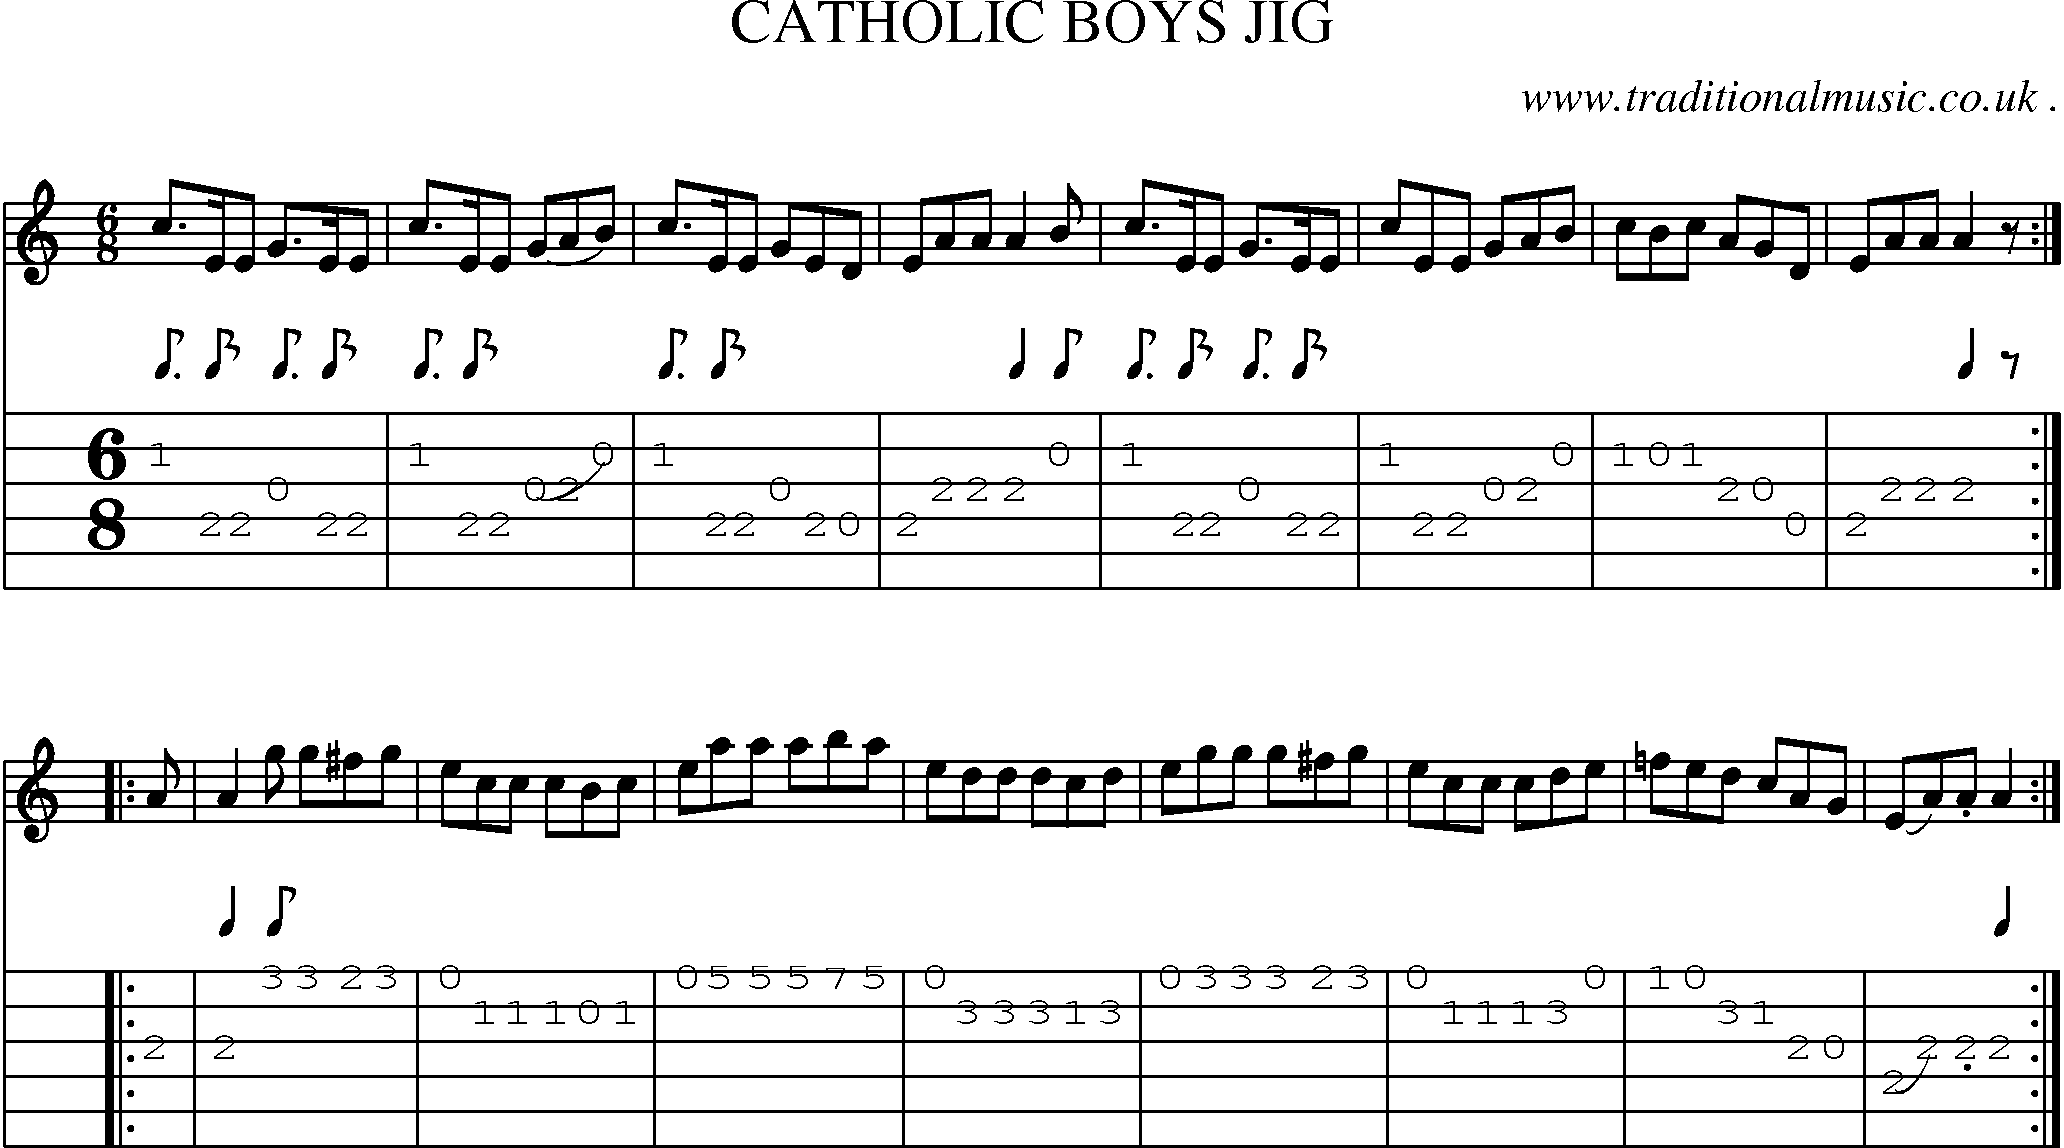 Sheet-Music and Guitar Tabs for Catholic Boys Jig